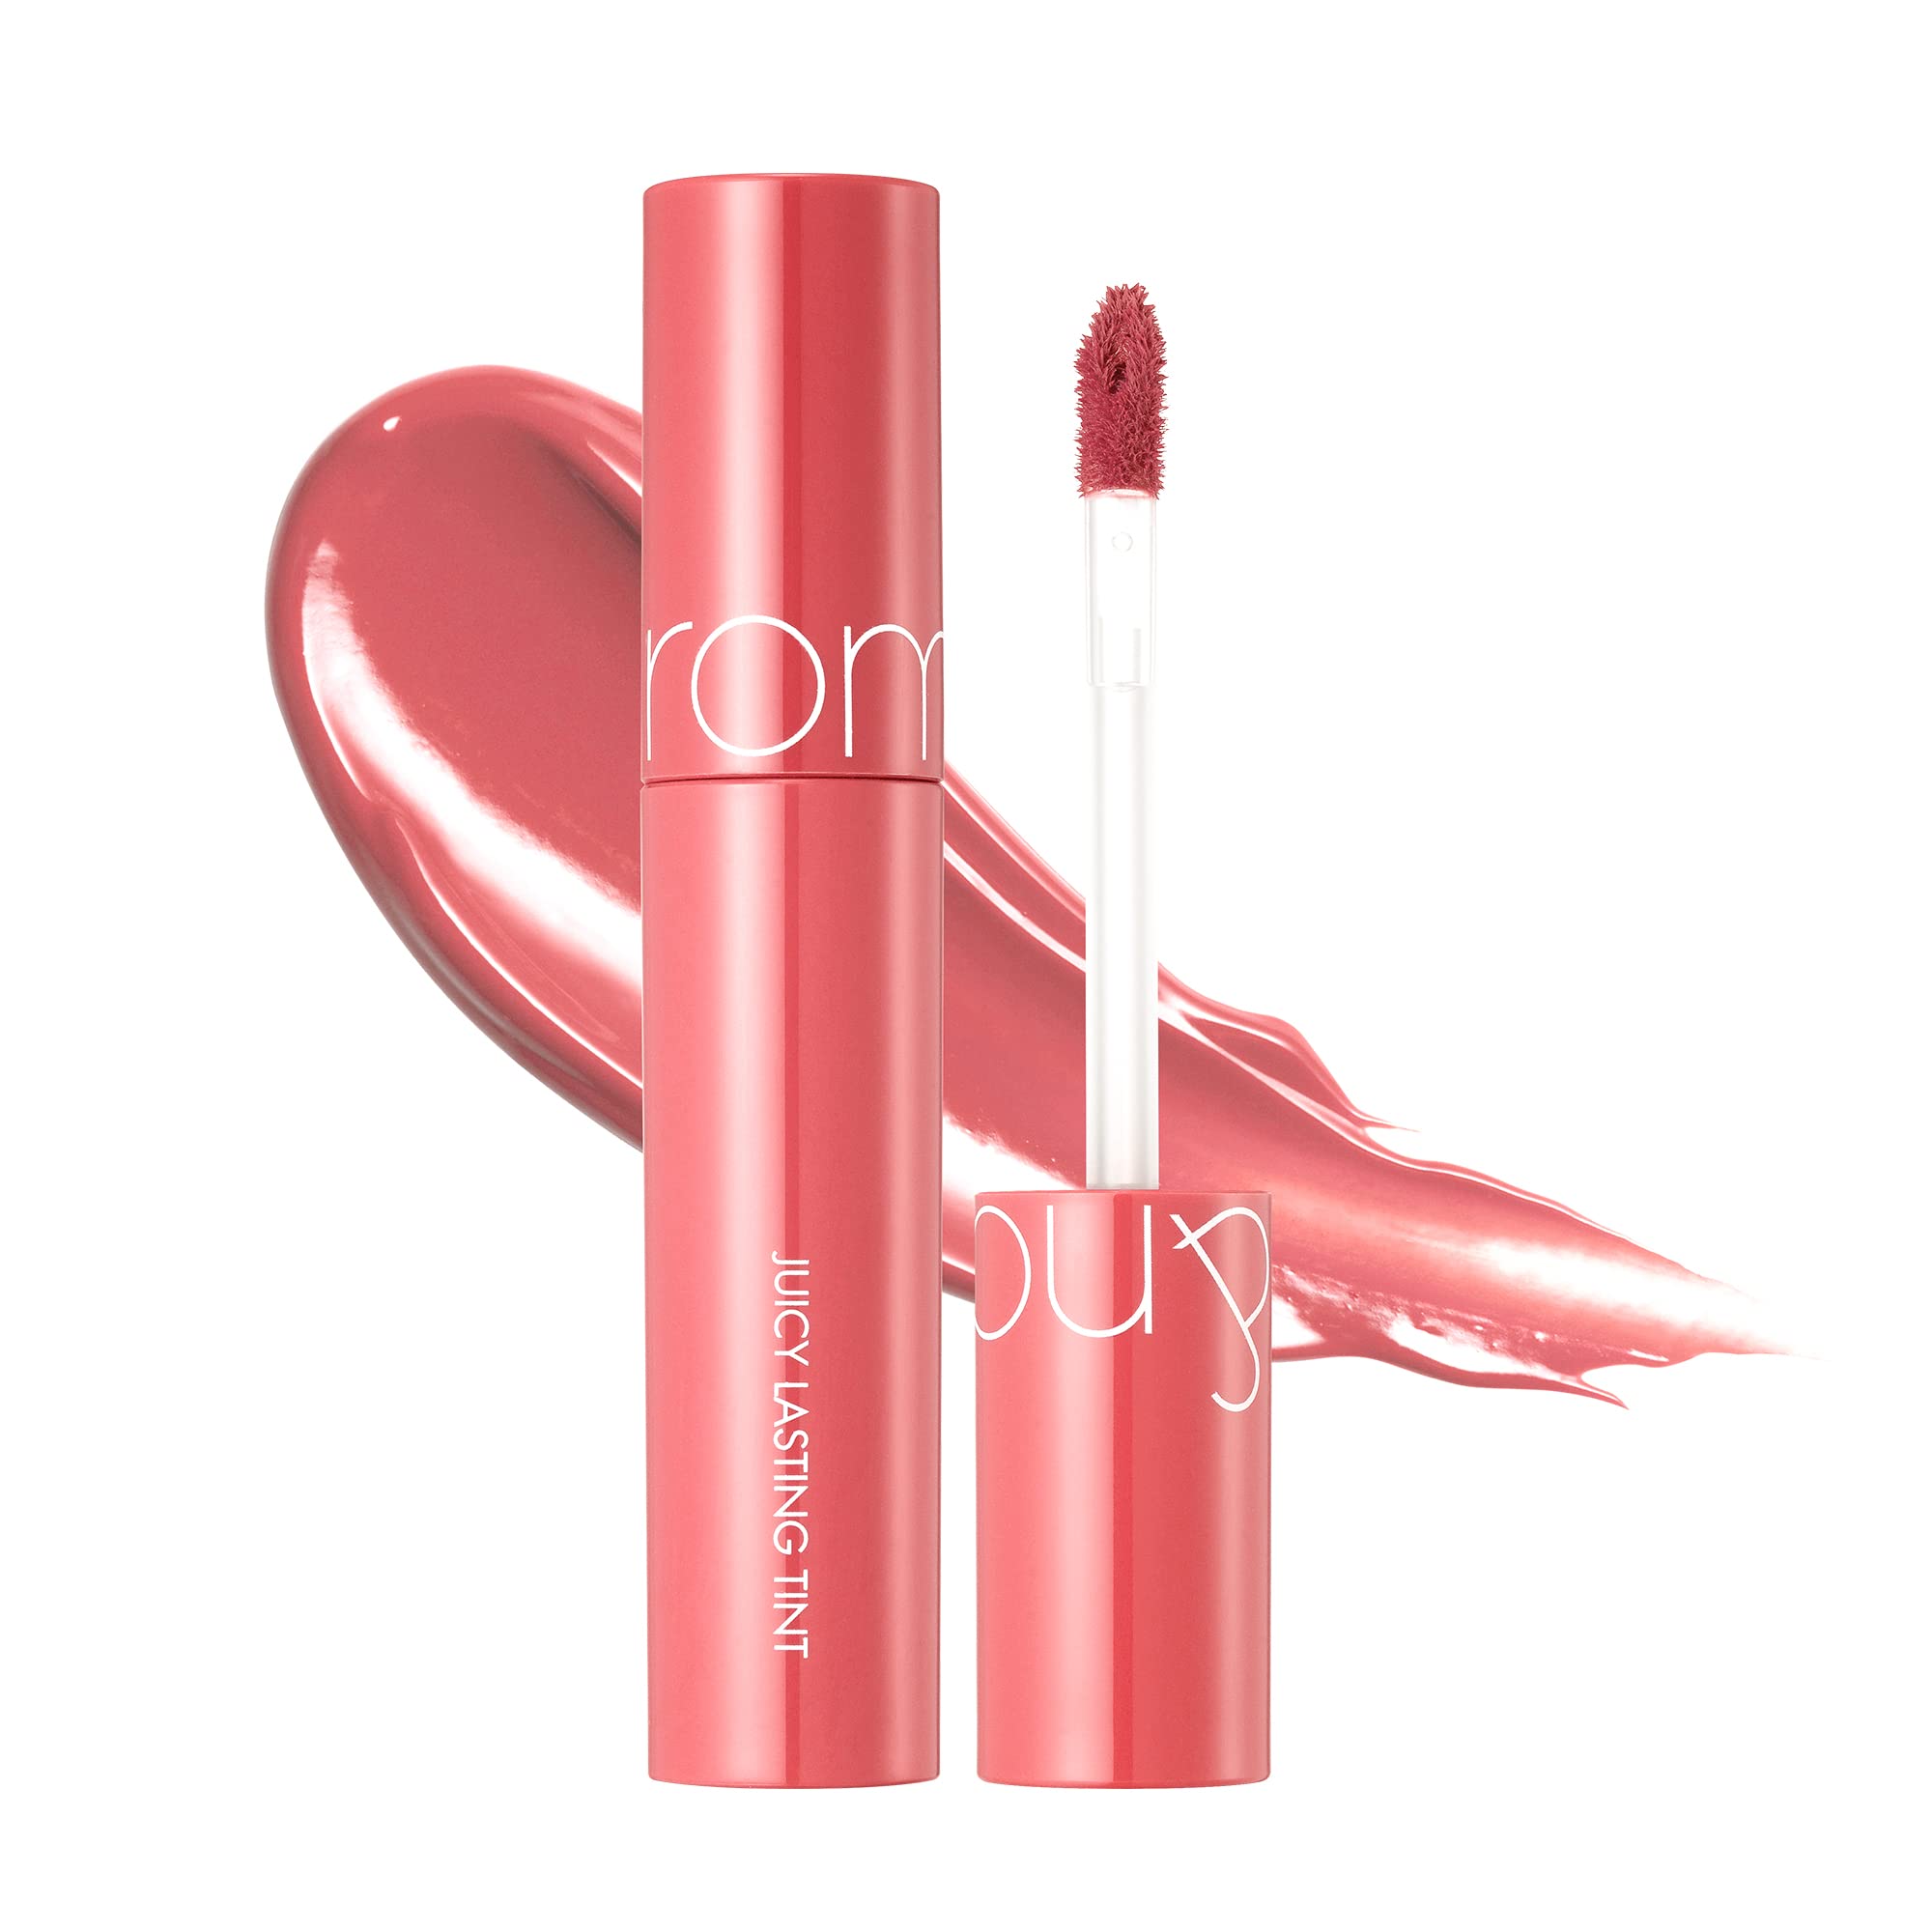 rom&nd Juicy Lasting Tint 16 colors, Vivid color, Glossy Finish, Long- lasting, moisturizing, Highlighting, Natural-beauty, Lip Tint for Daily  Use, K-beauty